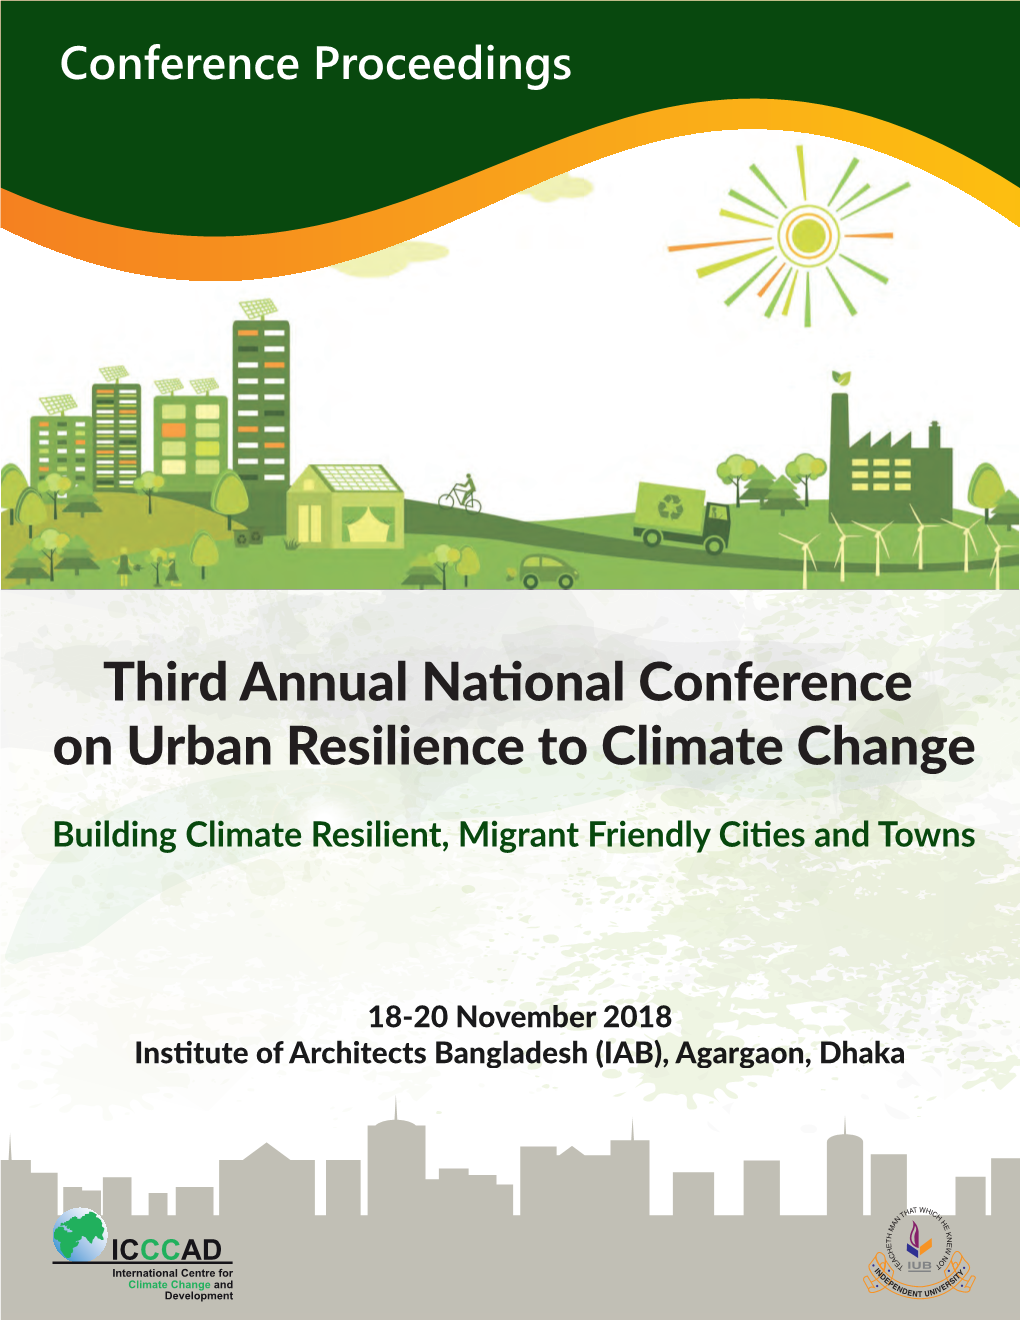 Proceeding of the Third Annual National Conference on Urban